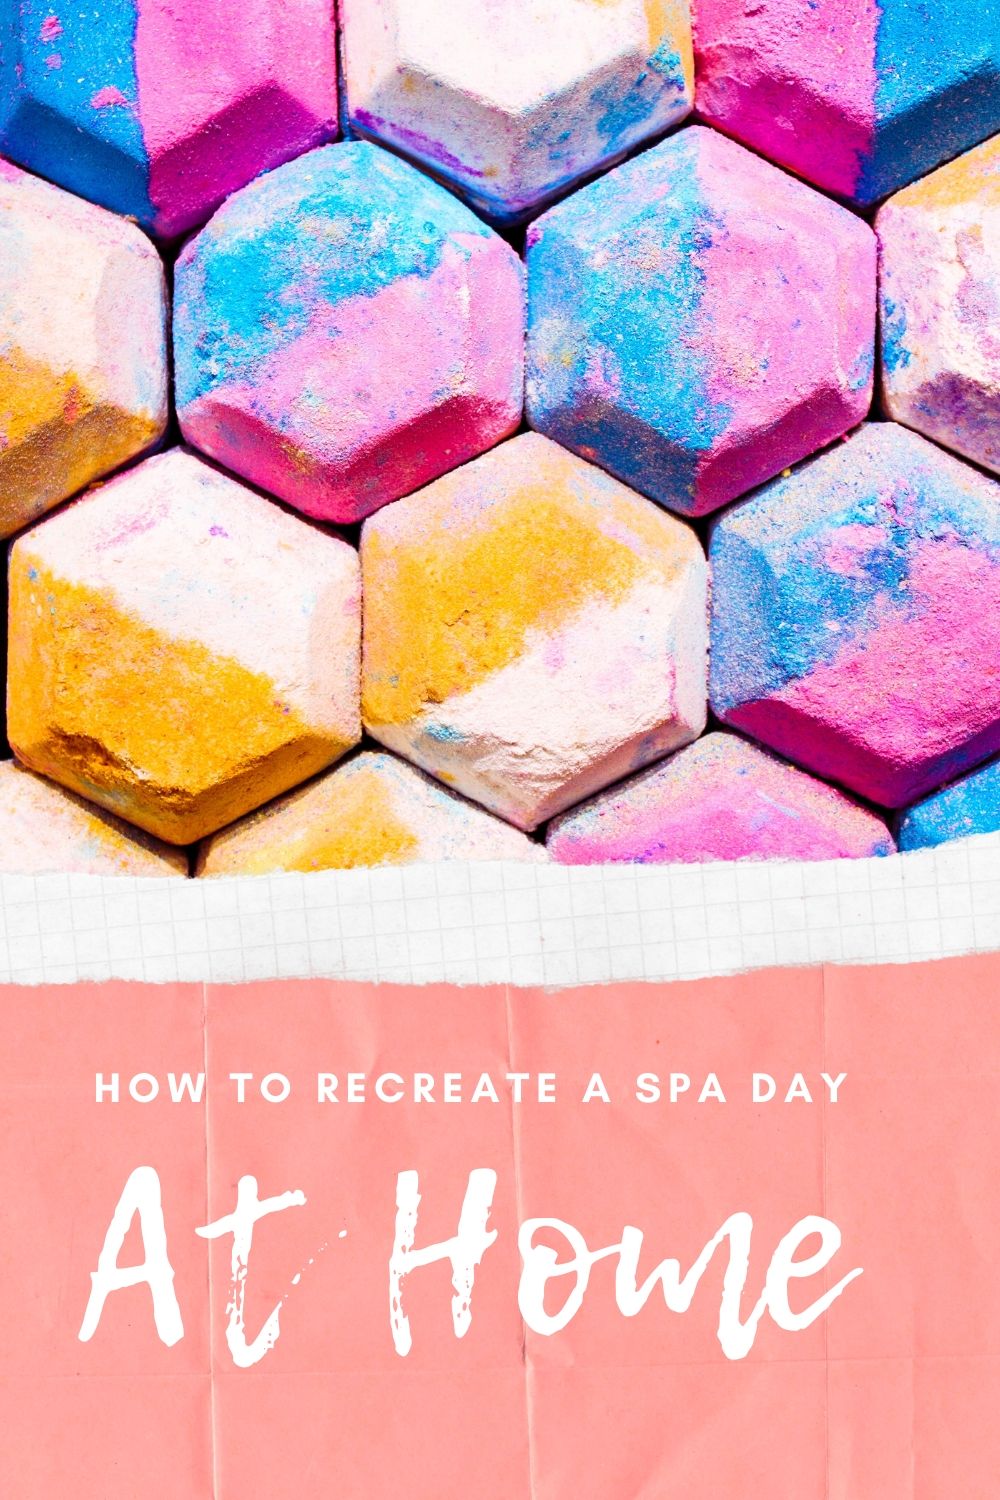 <img src="ana.jpg" alt="ana how to recreate a spa day at home graphic"/> 